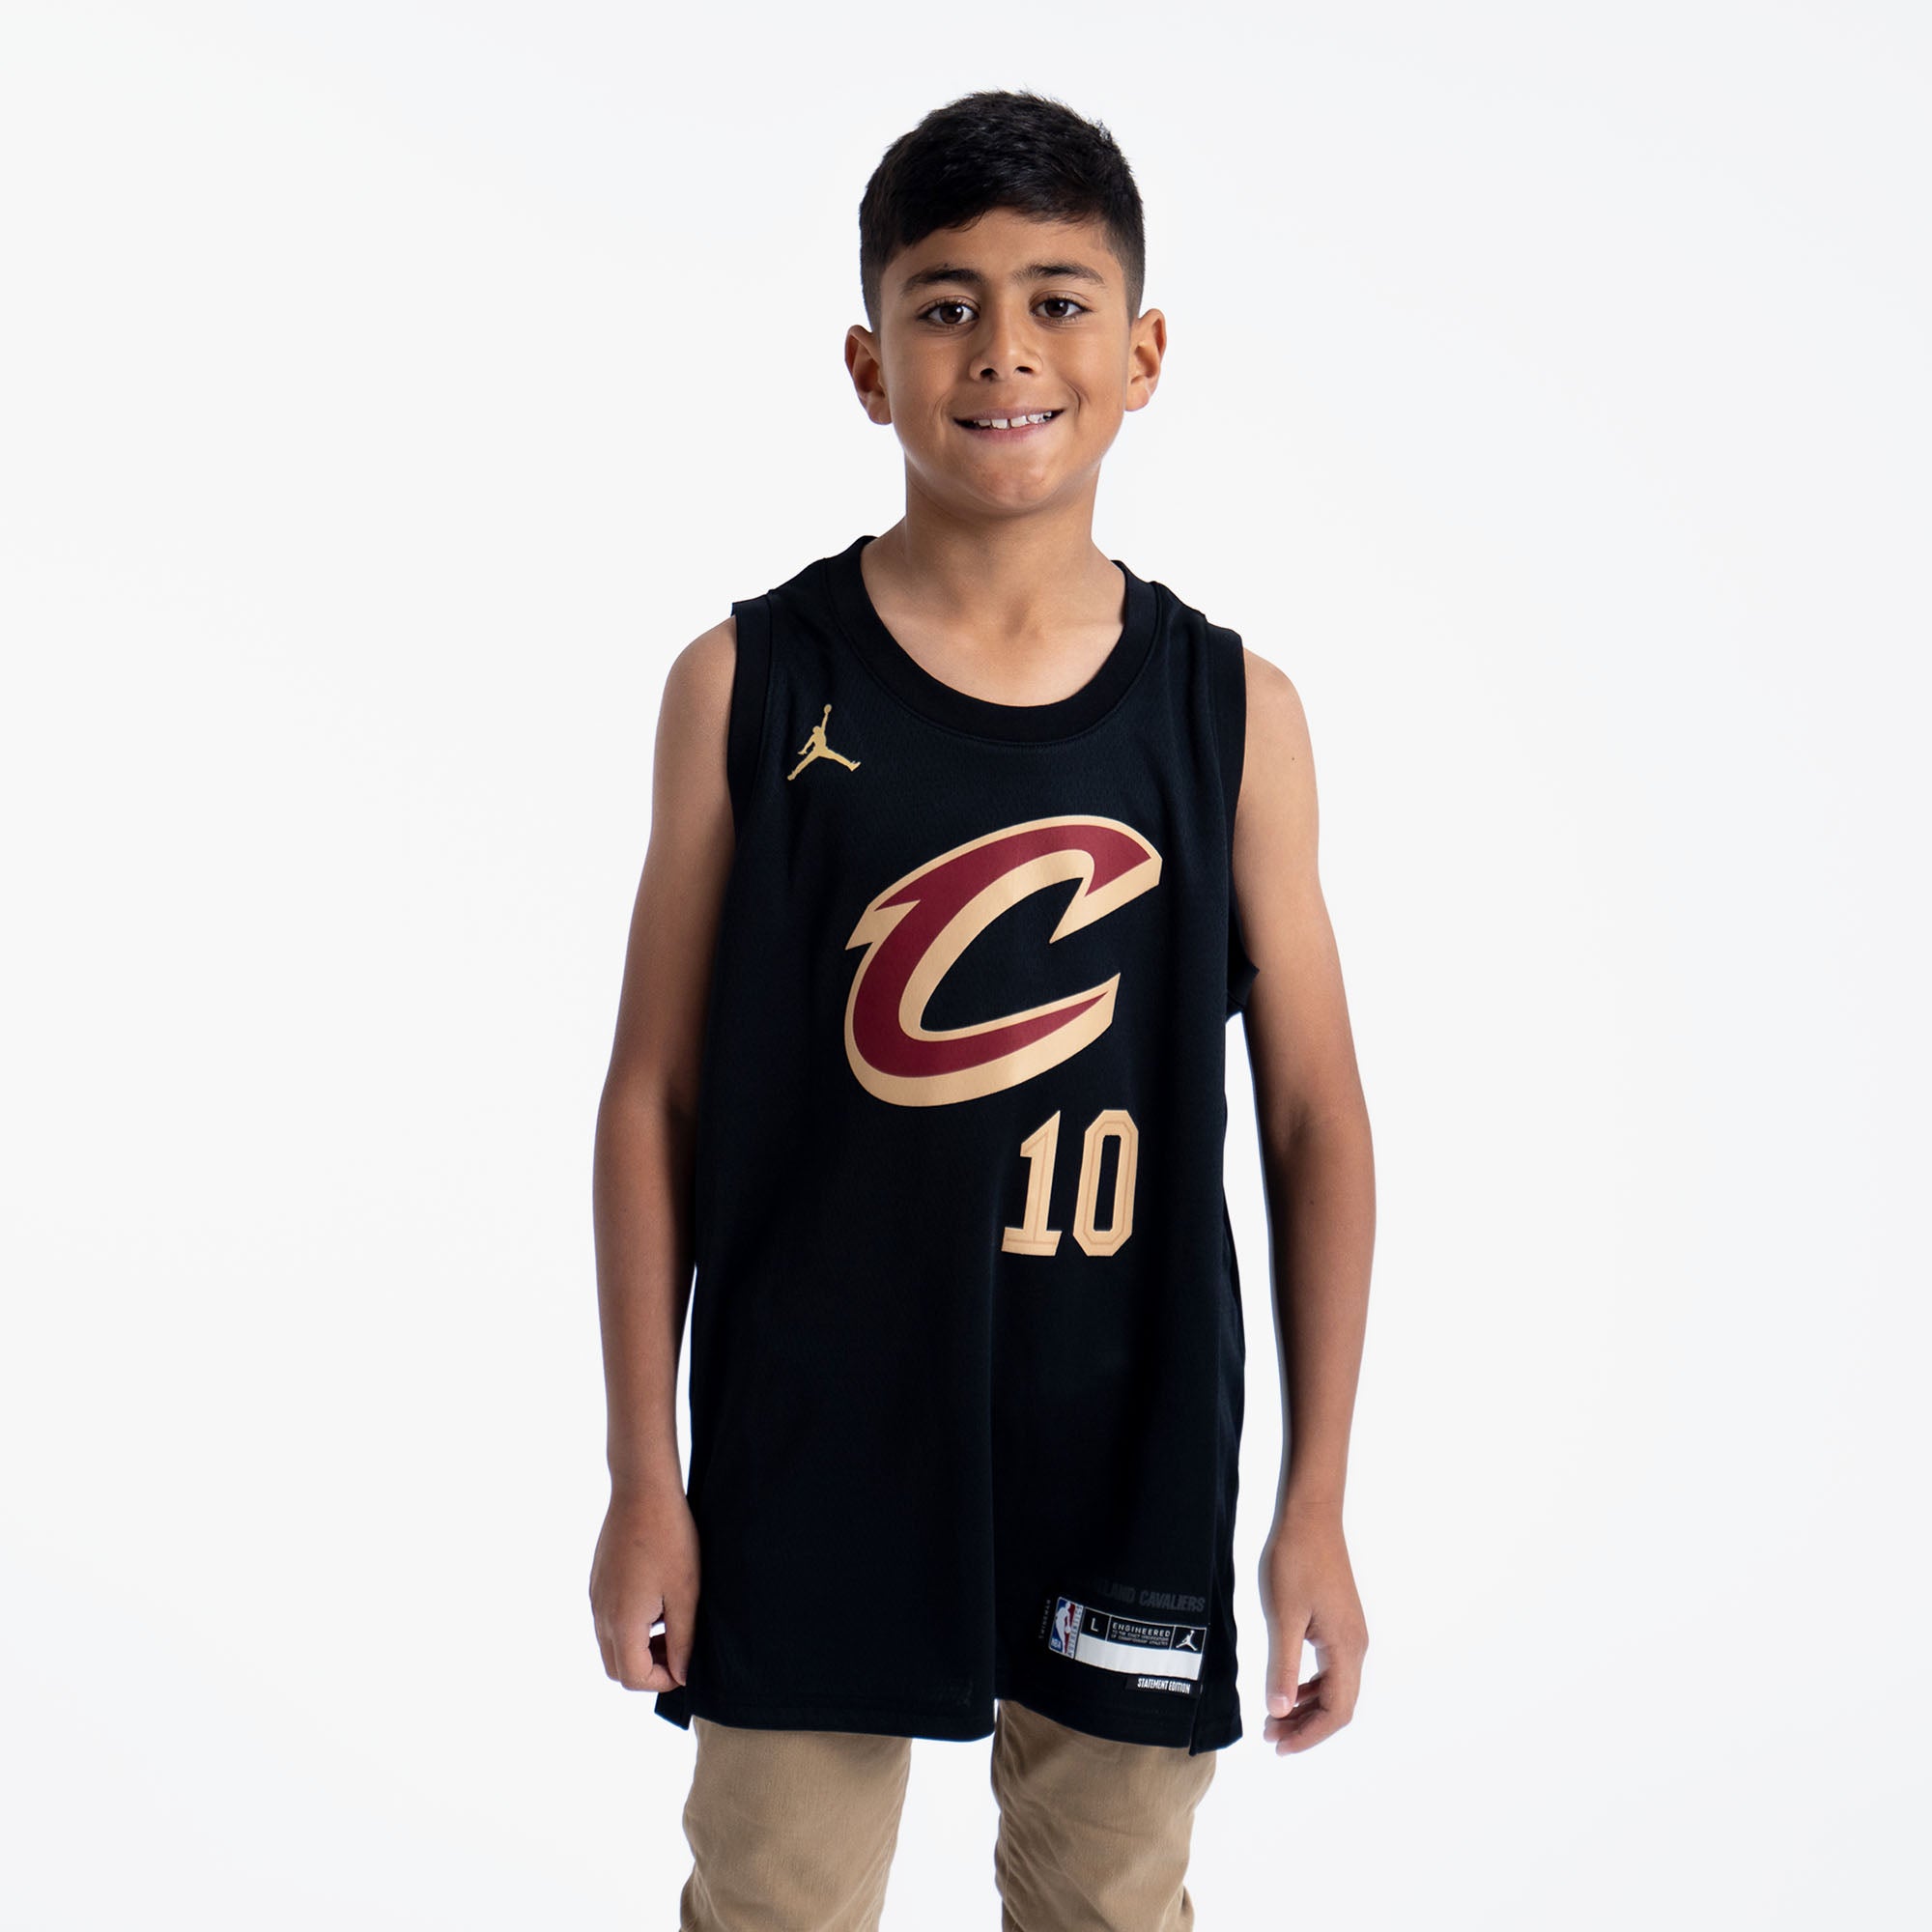 Youth Jordan Brand Donovan Mitchell Black Cleveland Cavaliers Name & Number Statement T-Shirt